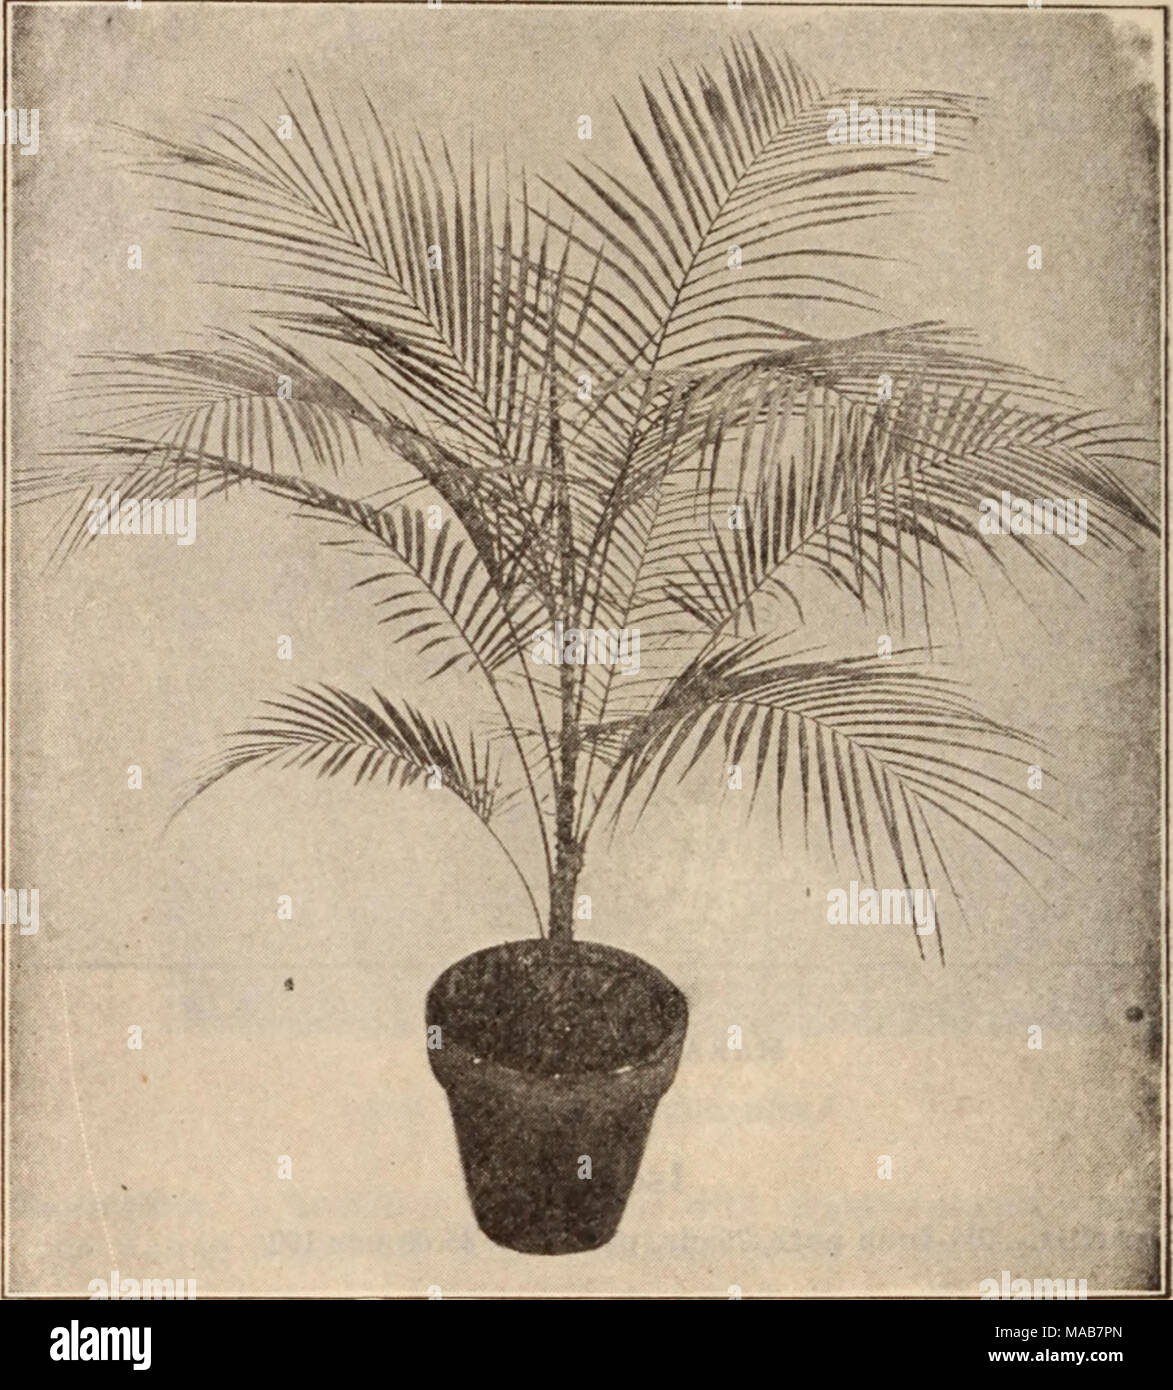 . Dreer's wholesale price list / Henry A. Dreer. . COCOS WEDDELIANA Acanthorhiza Aculeata. 5-inch pots, 11.50 each. Areca Lutescens. A splendid lot of 3-inch pots, 3 plants in a pot, a useful size that sells very freely. $1.25 per doz.; $10.00 per 100; $90.00 per 1000. Bactris Major. A rare and unique Palm, interesting on account of the long spines with which both surfaces of the leaf are covered. 5-inch pots, $1.50 each. Calimeris Ciliata. A splendid collection Palm of so-termed climbing habit. 3'/2-inch pots, $3.00 each. Caryota Urens. 2'/4-inch pots, $1.25 per doz.; $ 8.00 per 100. 3 &quot; Stock Photo